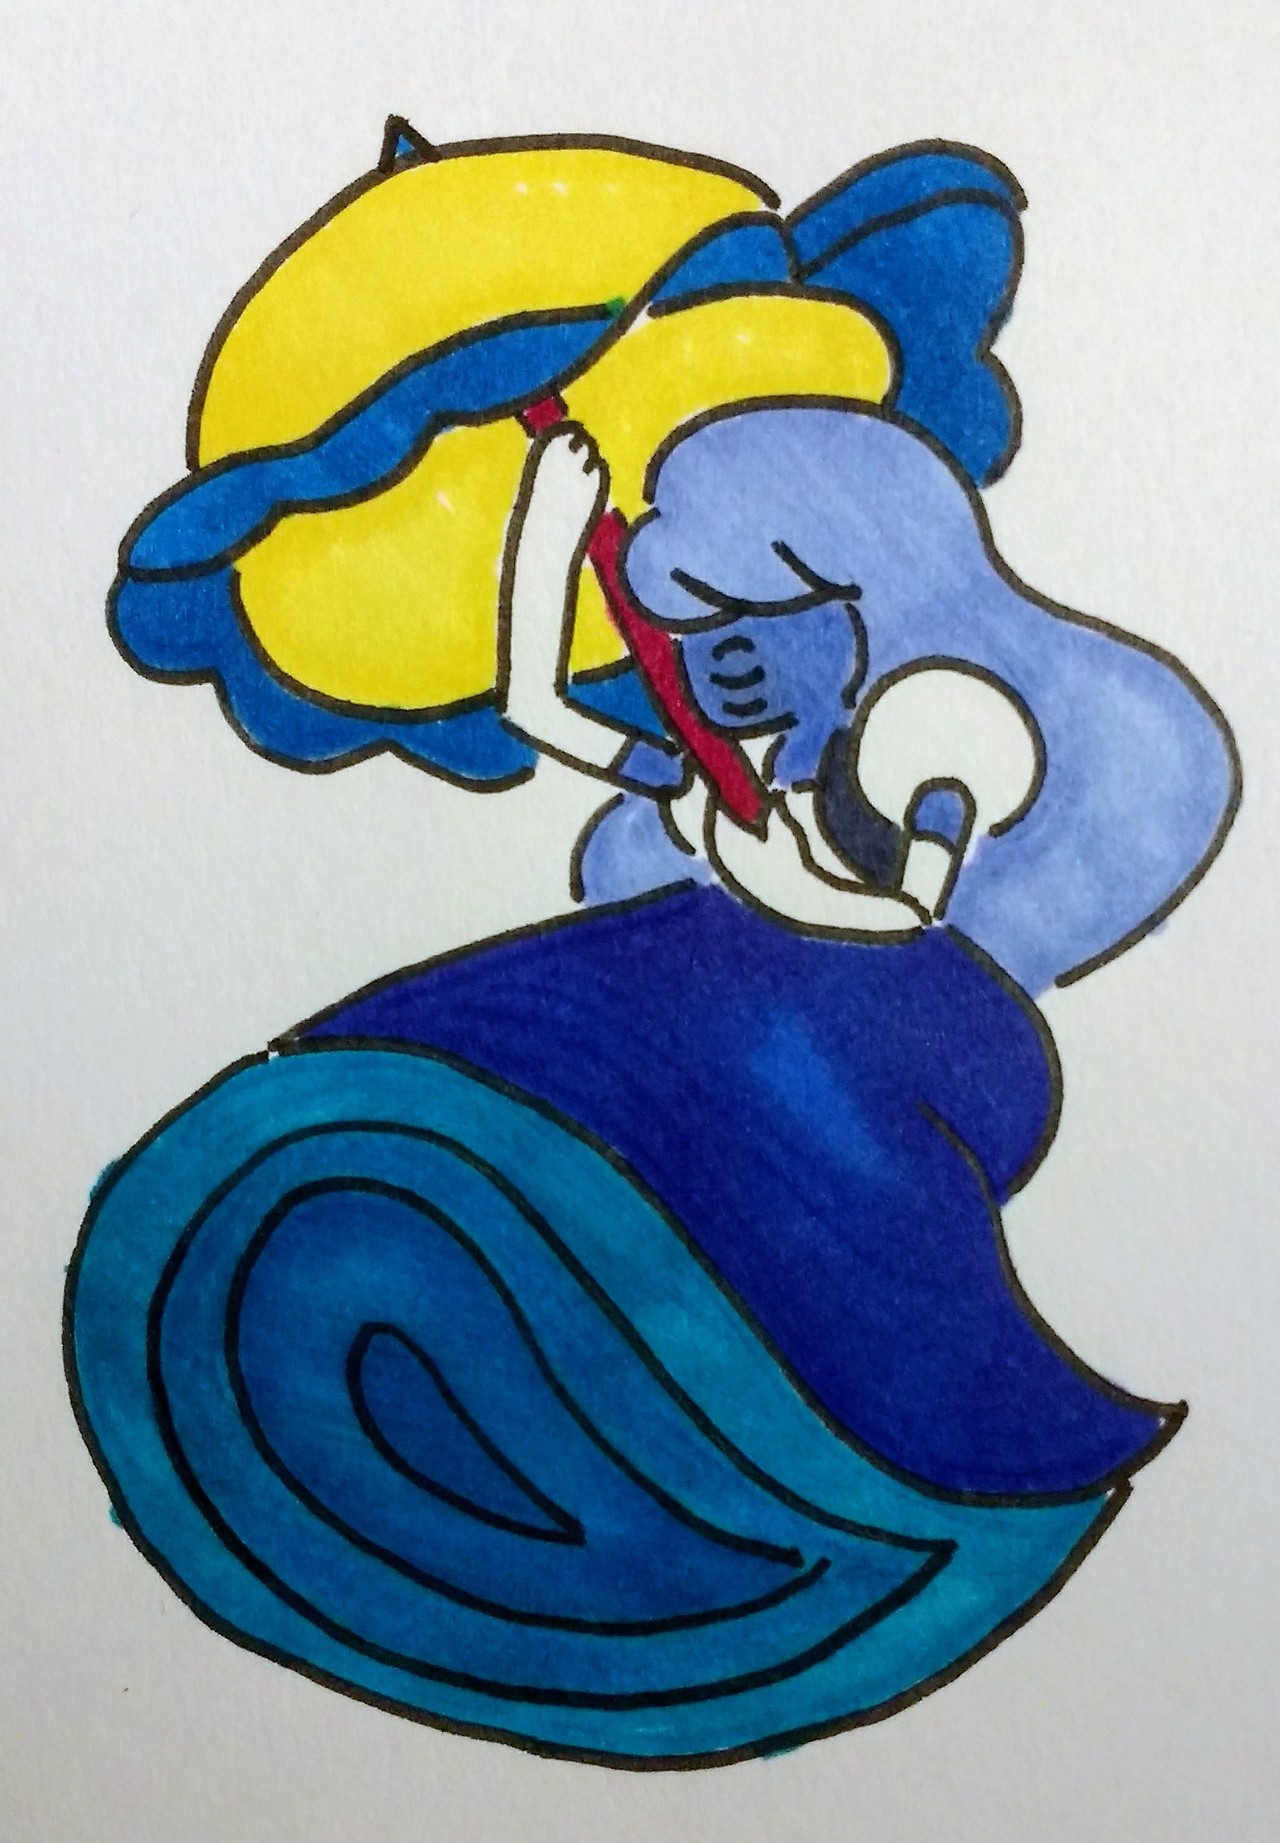 Sapphire on a parasol, this was based off a picture of Princess Peach